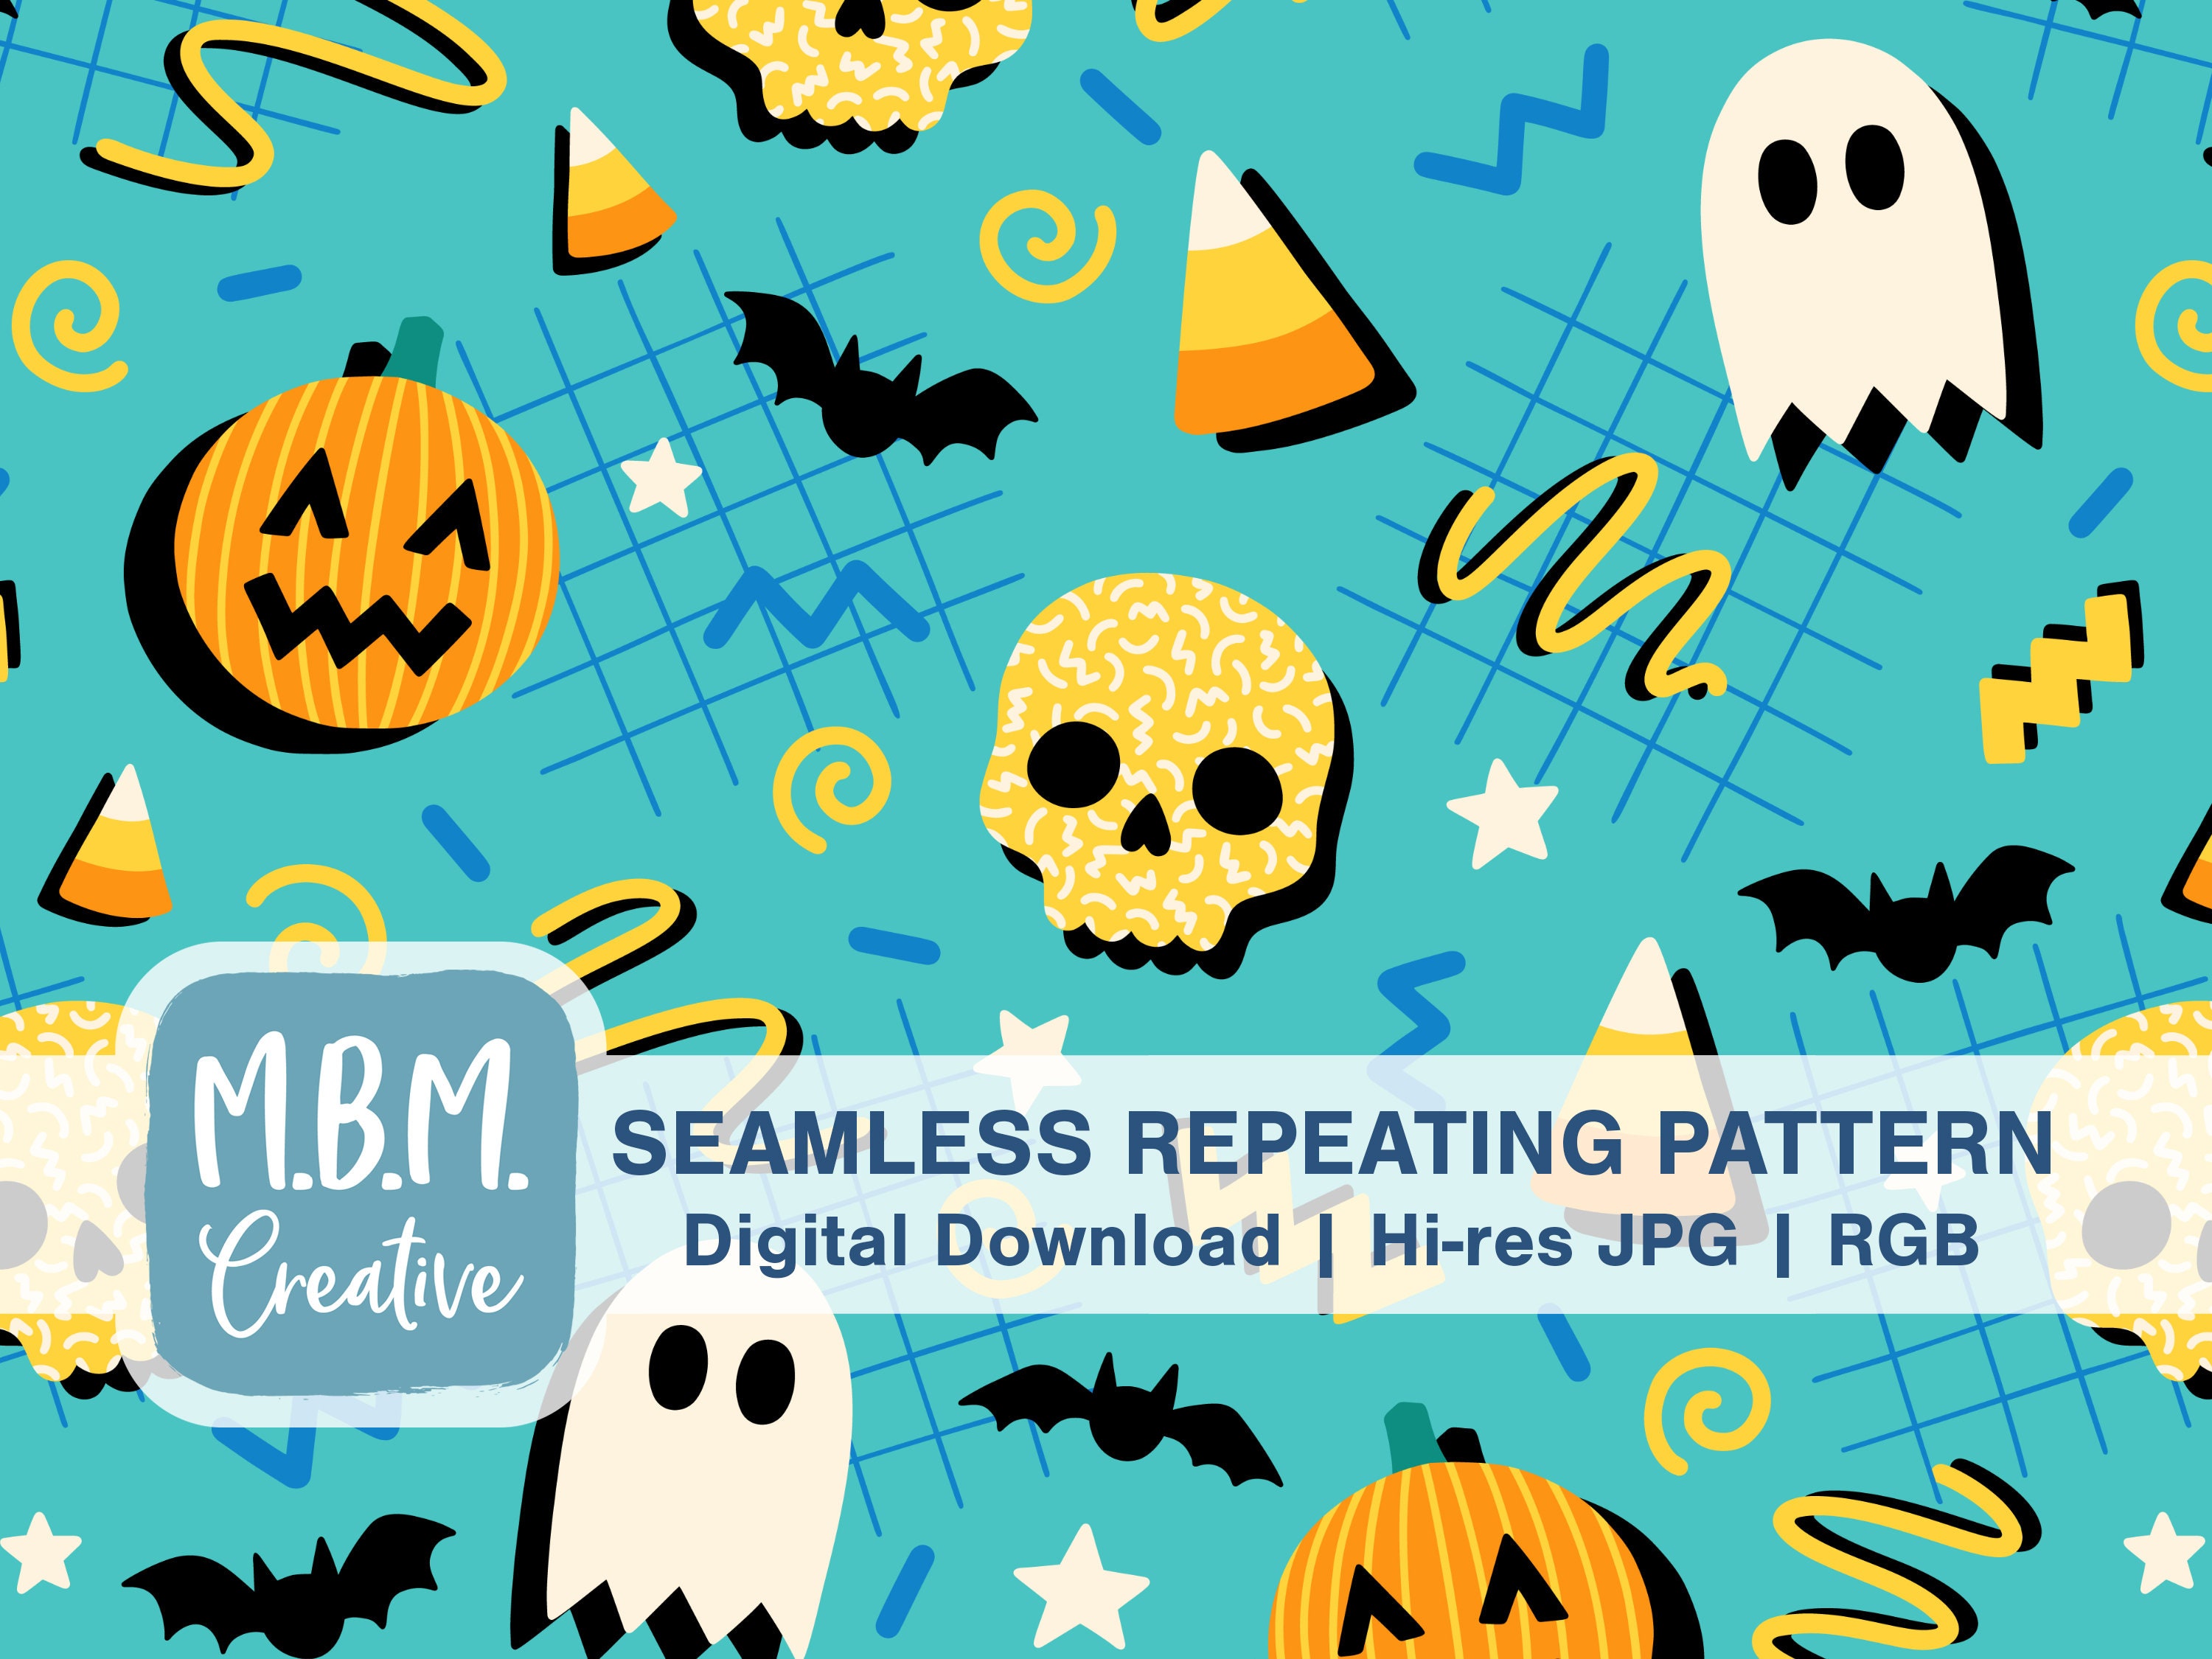 Watercolor hand drawn Halloween seamless pattern, Scary Party